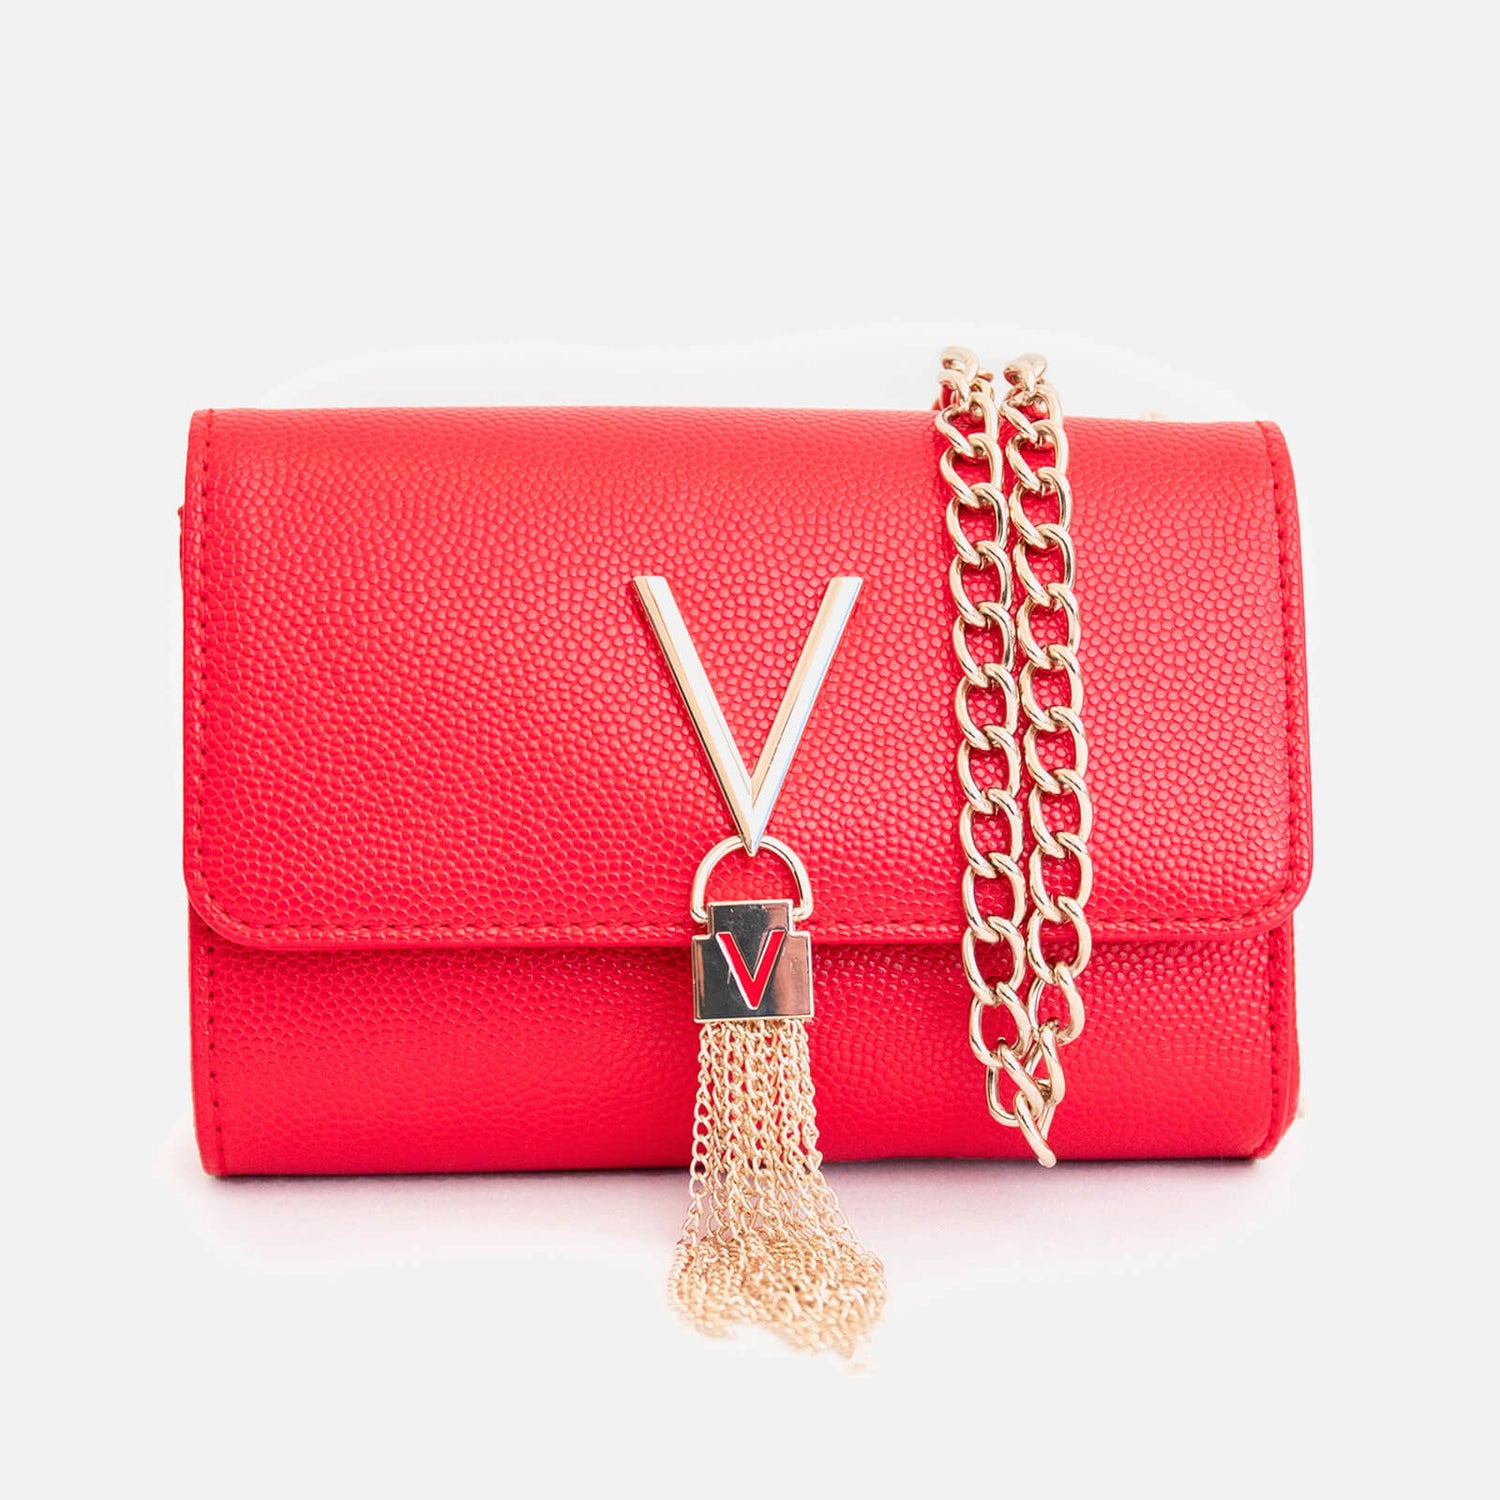 Valentino Bags Women's Divina Small Shoulder Bag - Red